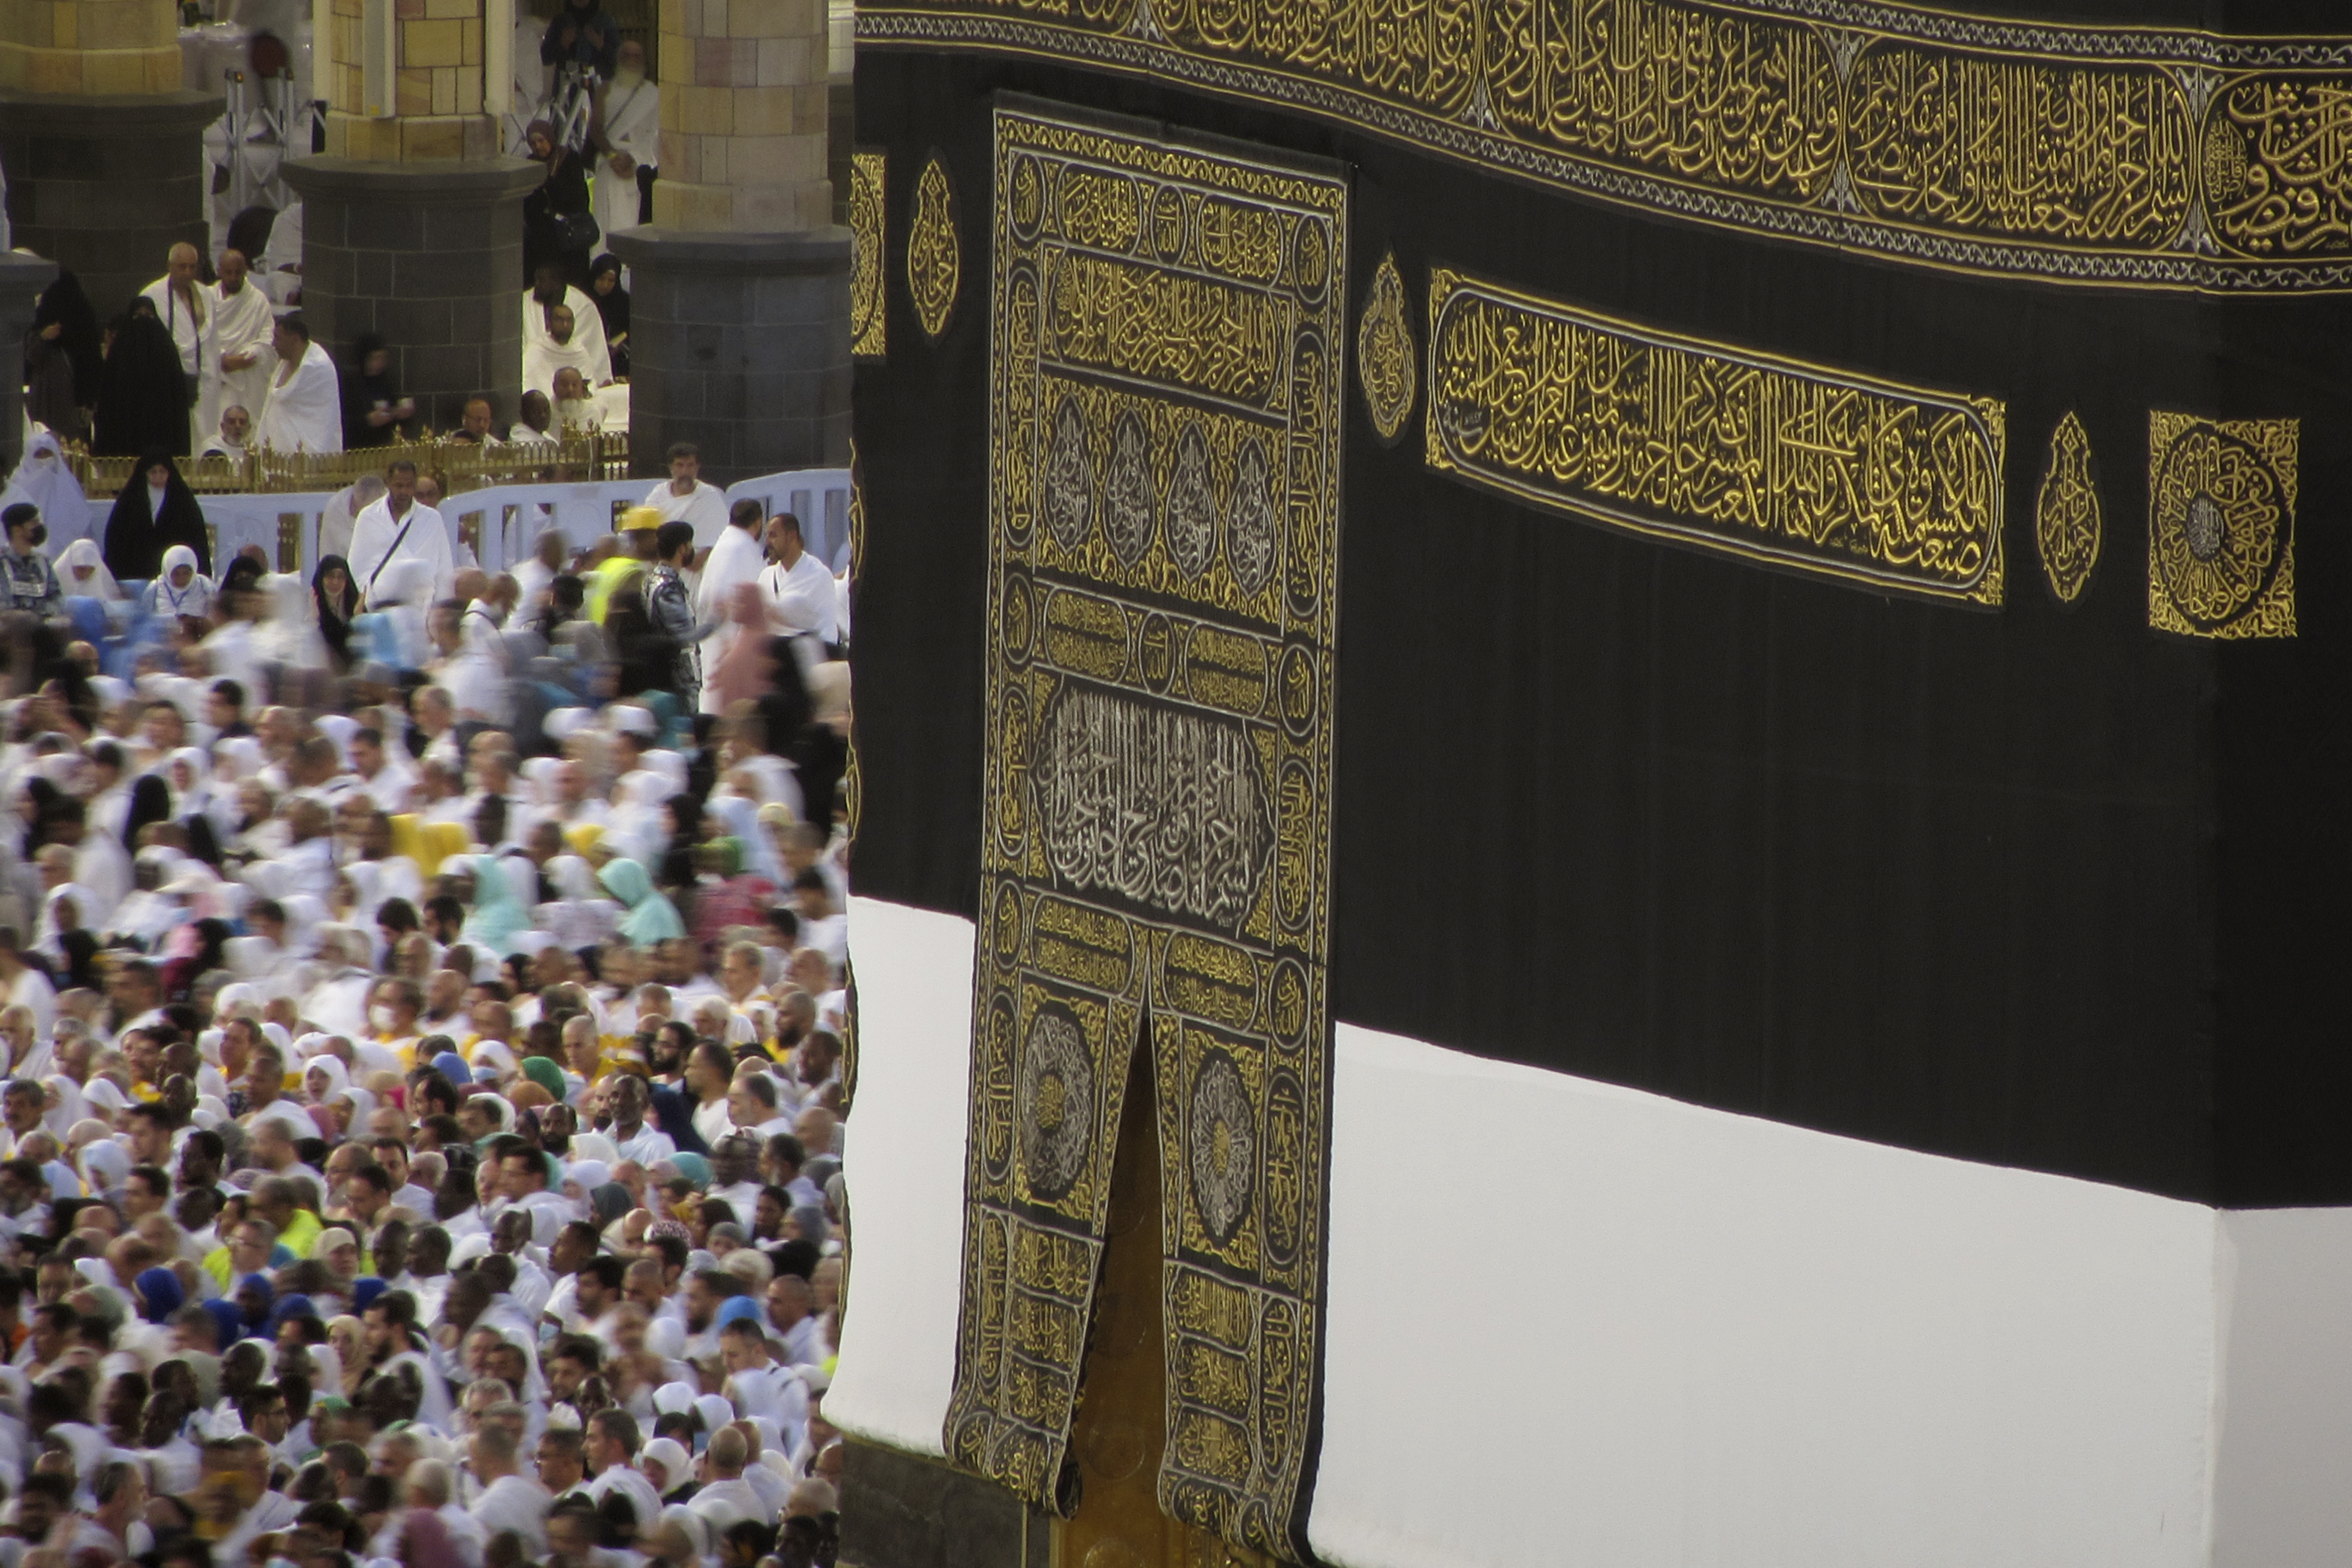 Muslim pilgrims are converging on Saudi Arabia's holy city of Mecca for the largest hajj since the coronavirus pandemic severely curtailed access to one of Islam's five pillars. This article will explain the pilgrimage they undertake and its significance.